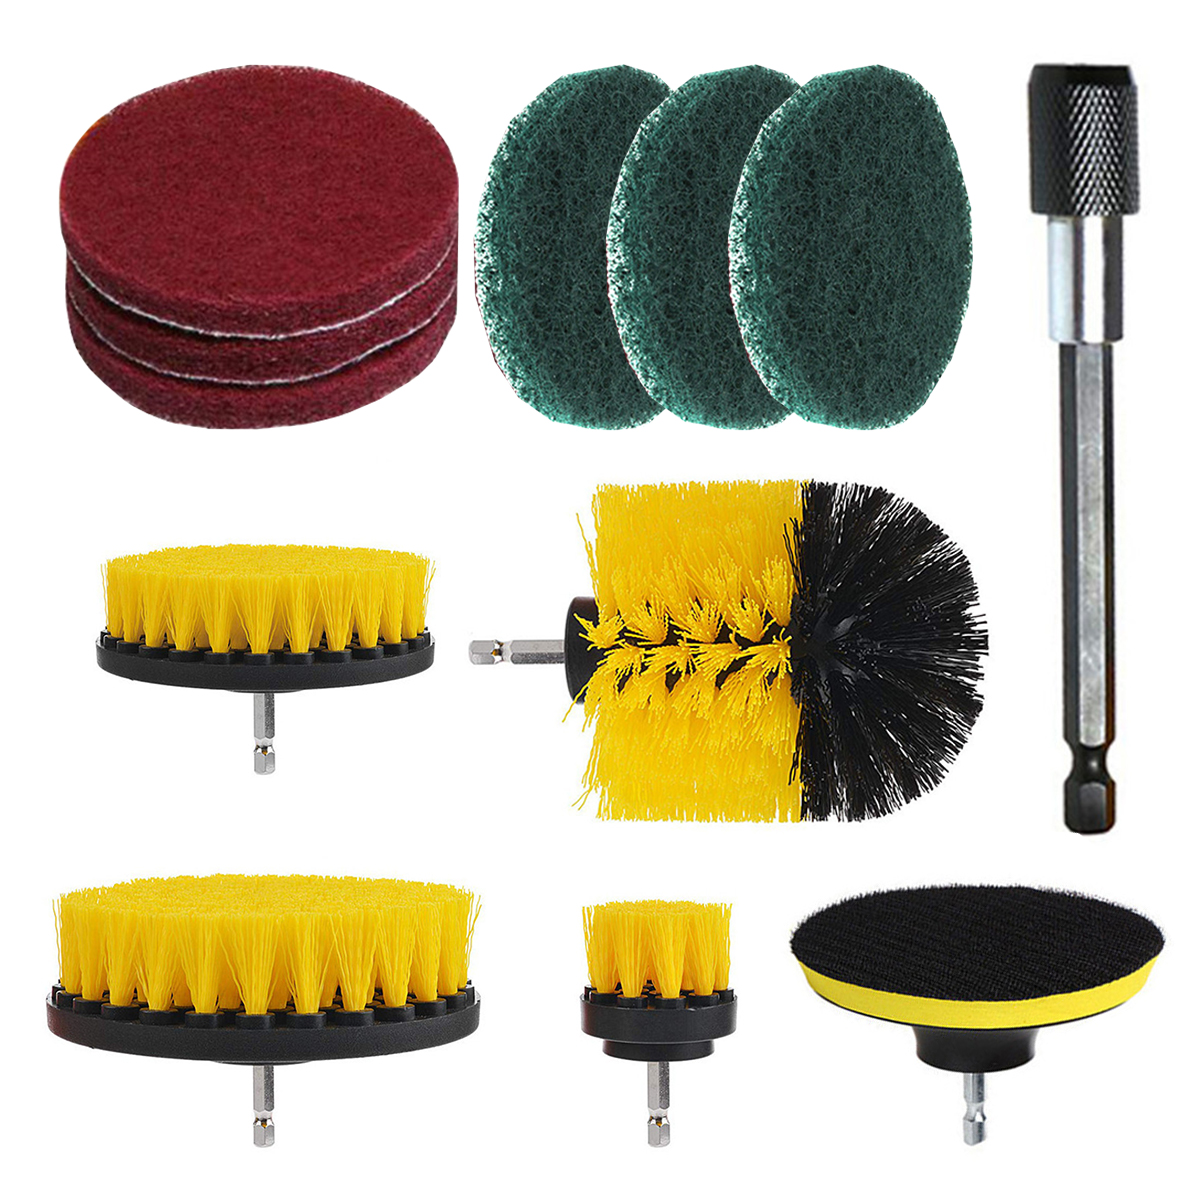 12Pcs-Drill-Brush-Set-Tub-Cleaner-Grout-Power-Scrubber-Cleaning-Attachments-Kit-1780037-7